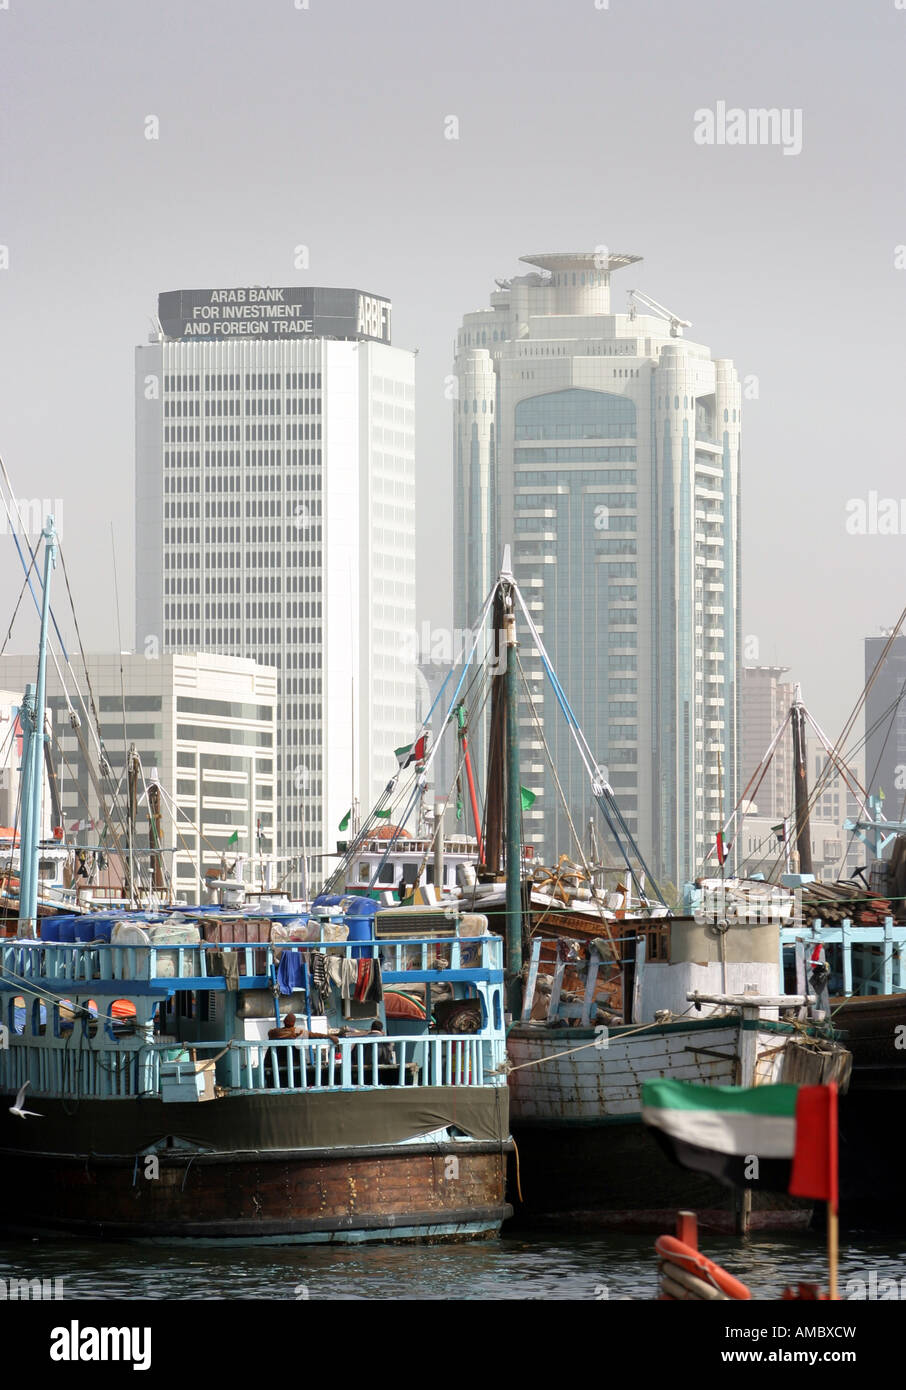 Old dhows in front of modern skyscrapers, Dubai harbour, UAE Stock Photo